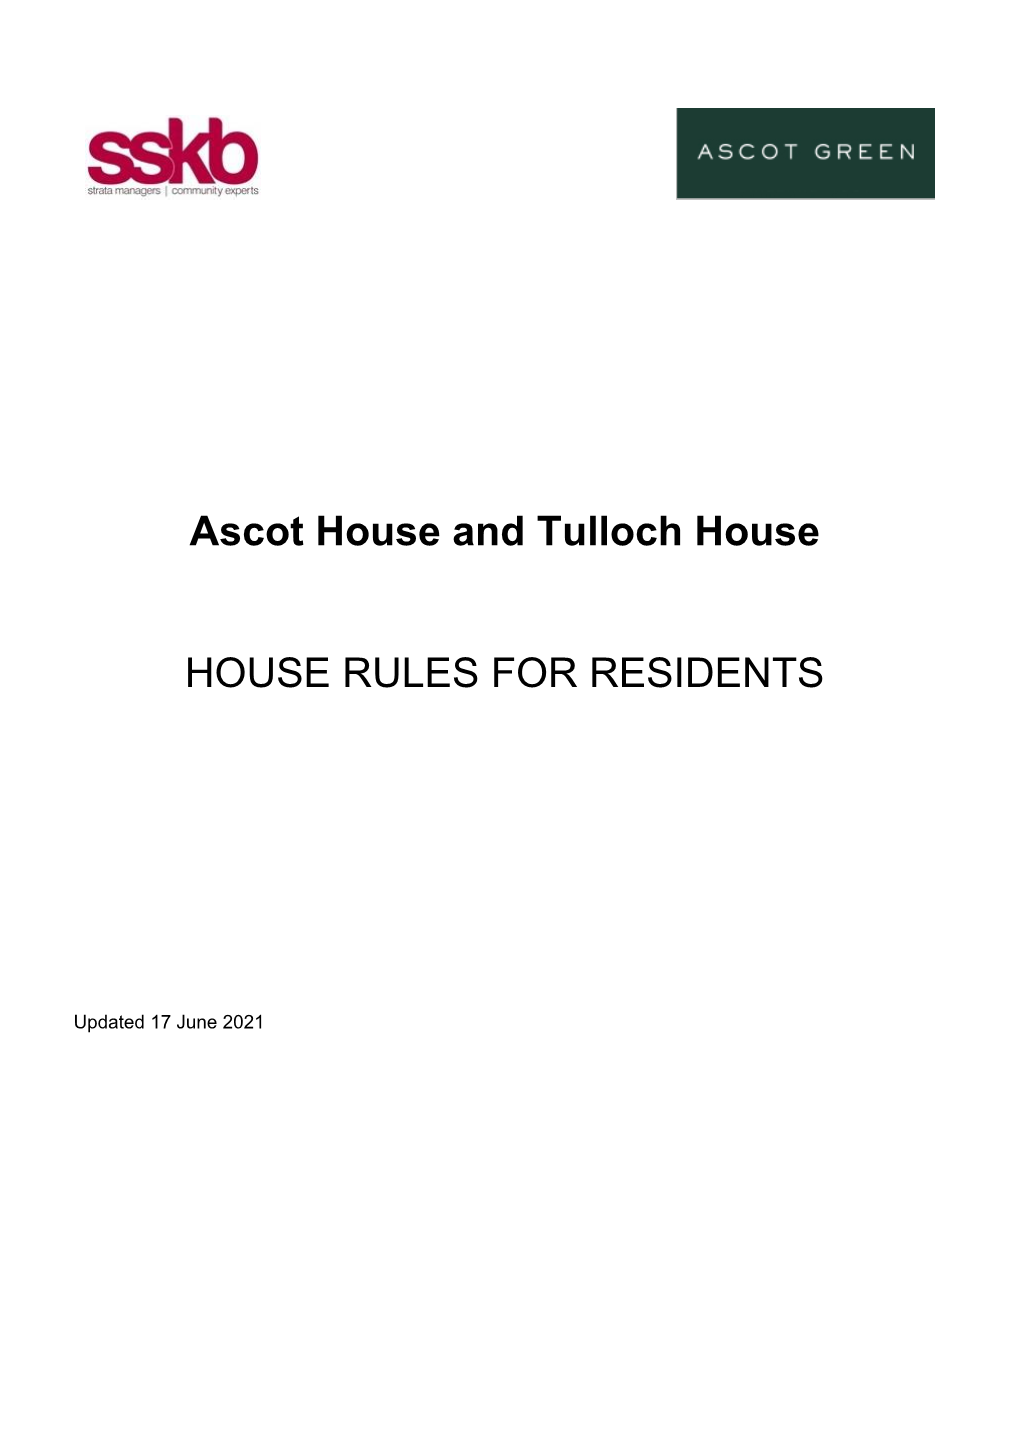 Ascot House and Tulloch House HOUSE RULES for RESIDENTS